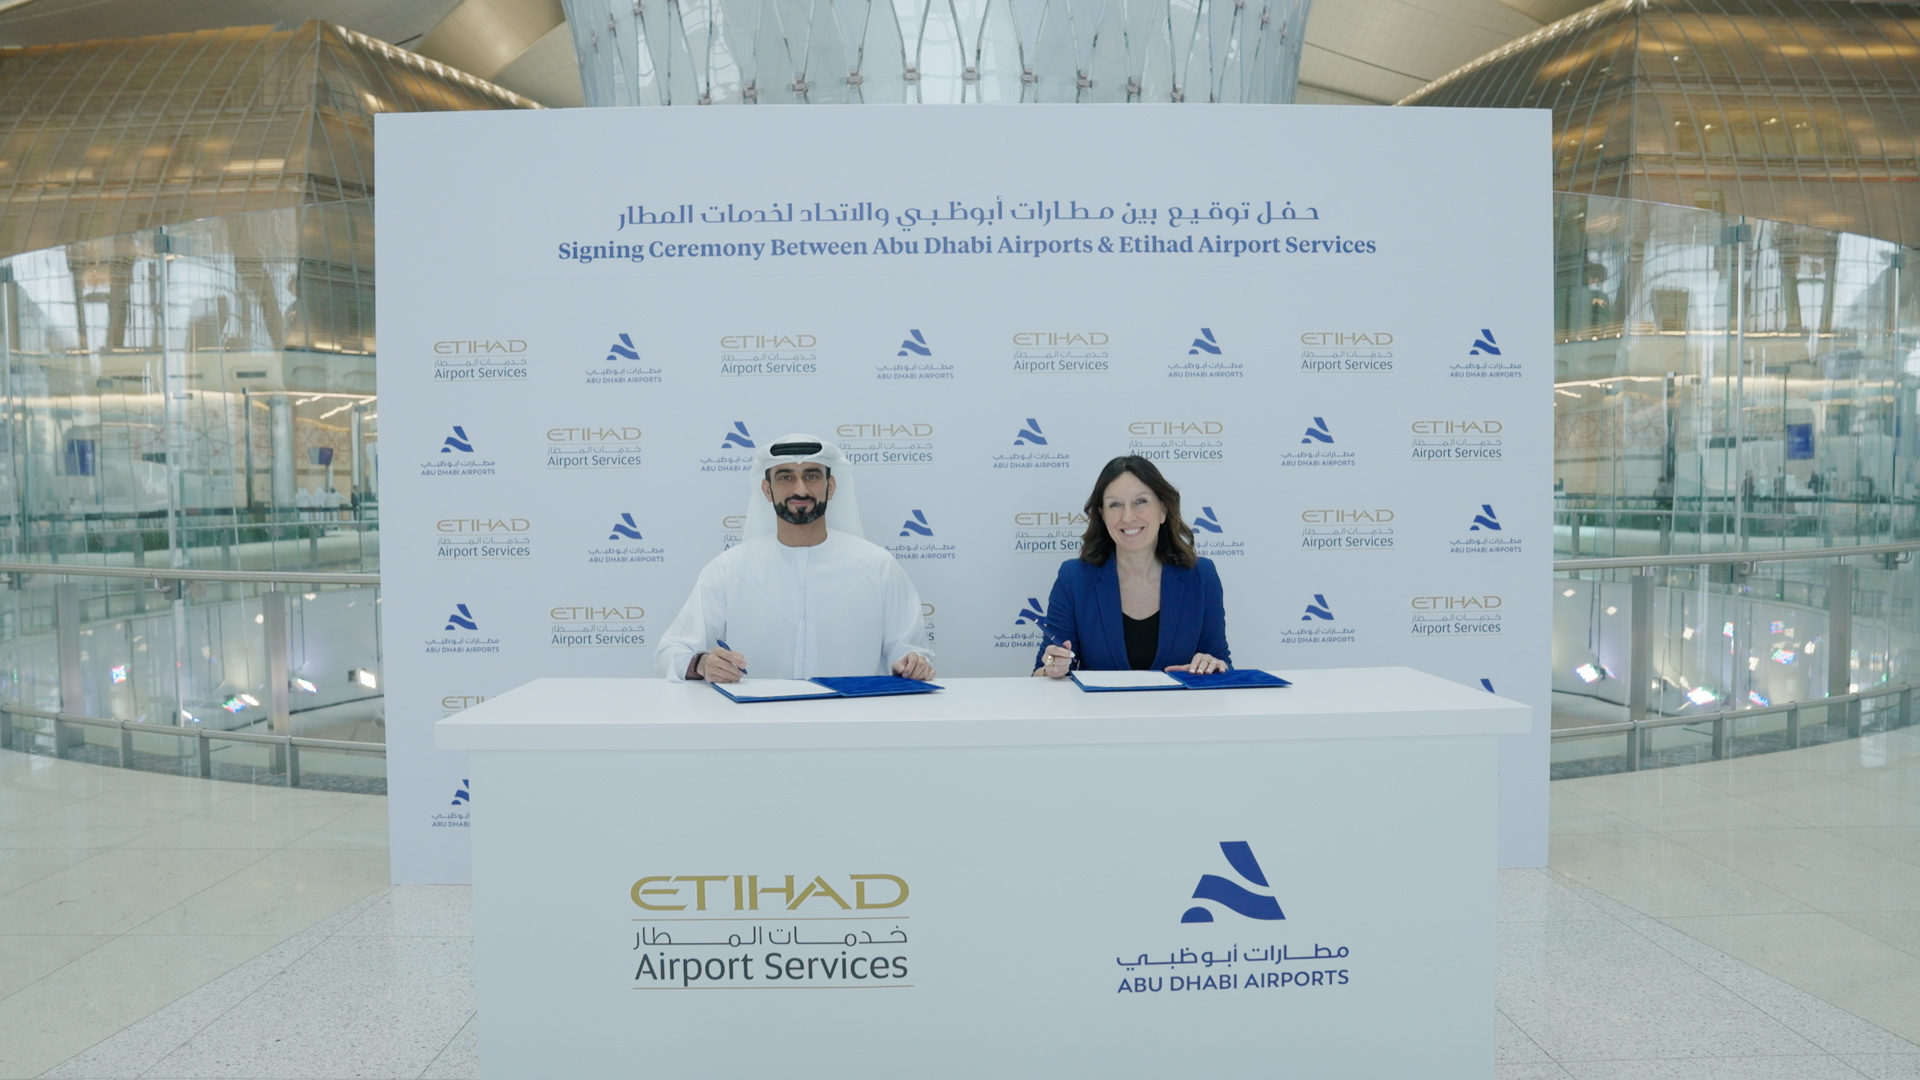 Abu Dhabi Airports And Etihad Airport Services Announce Partnership To Strengthen Airport Ground Services